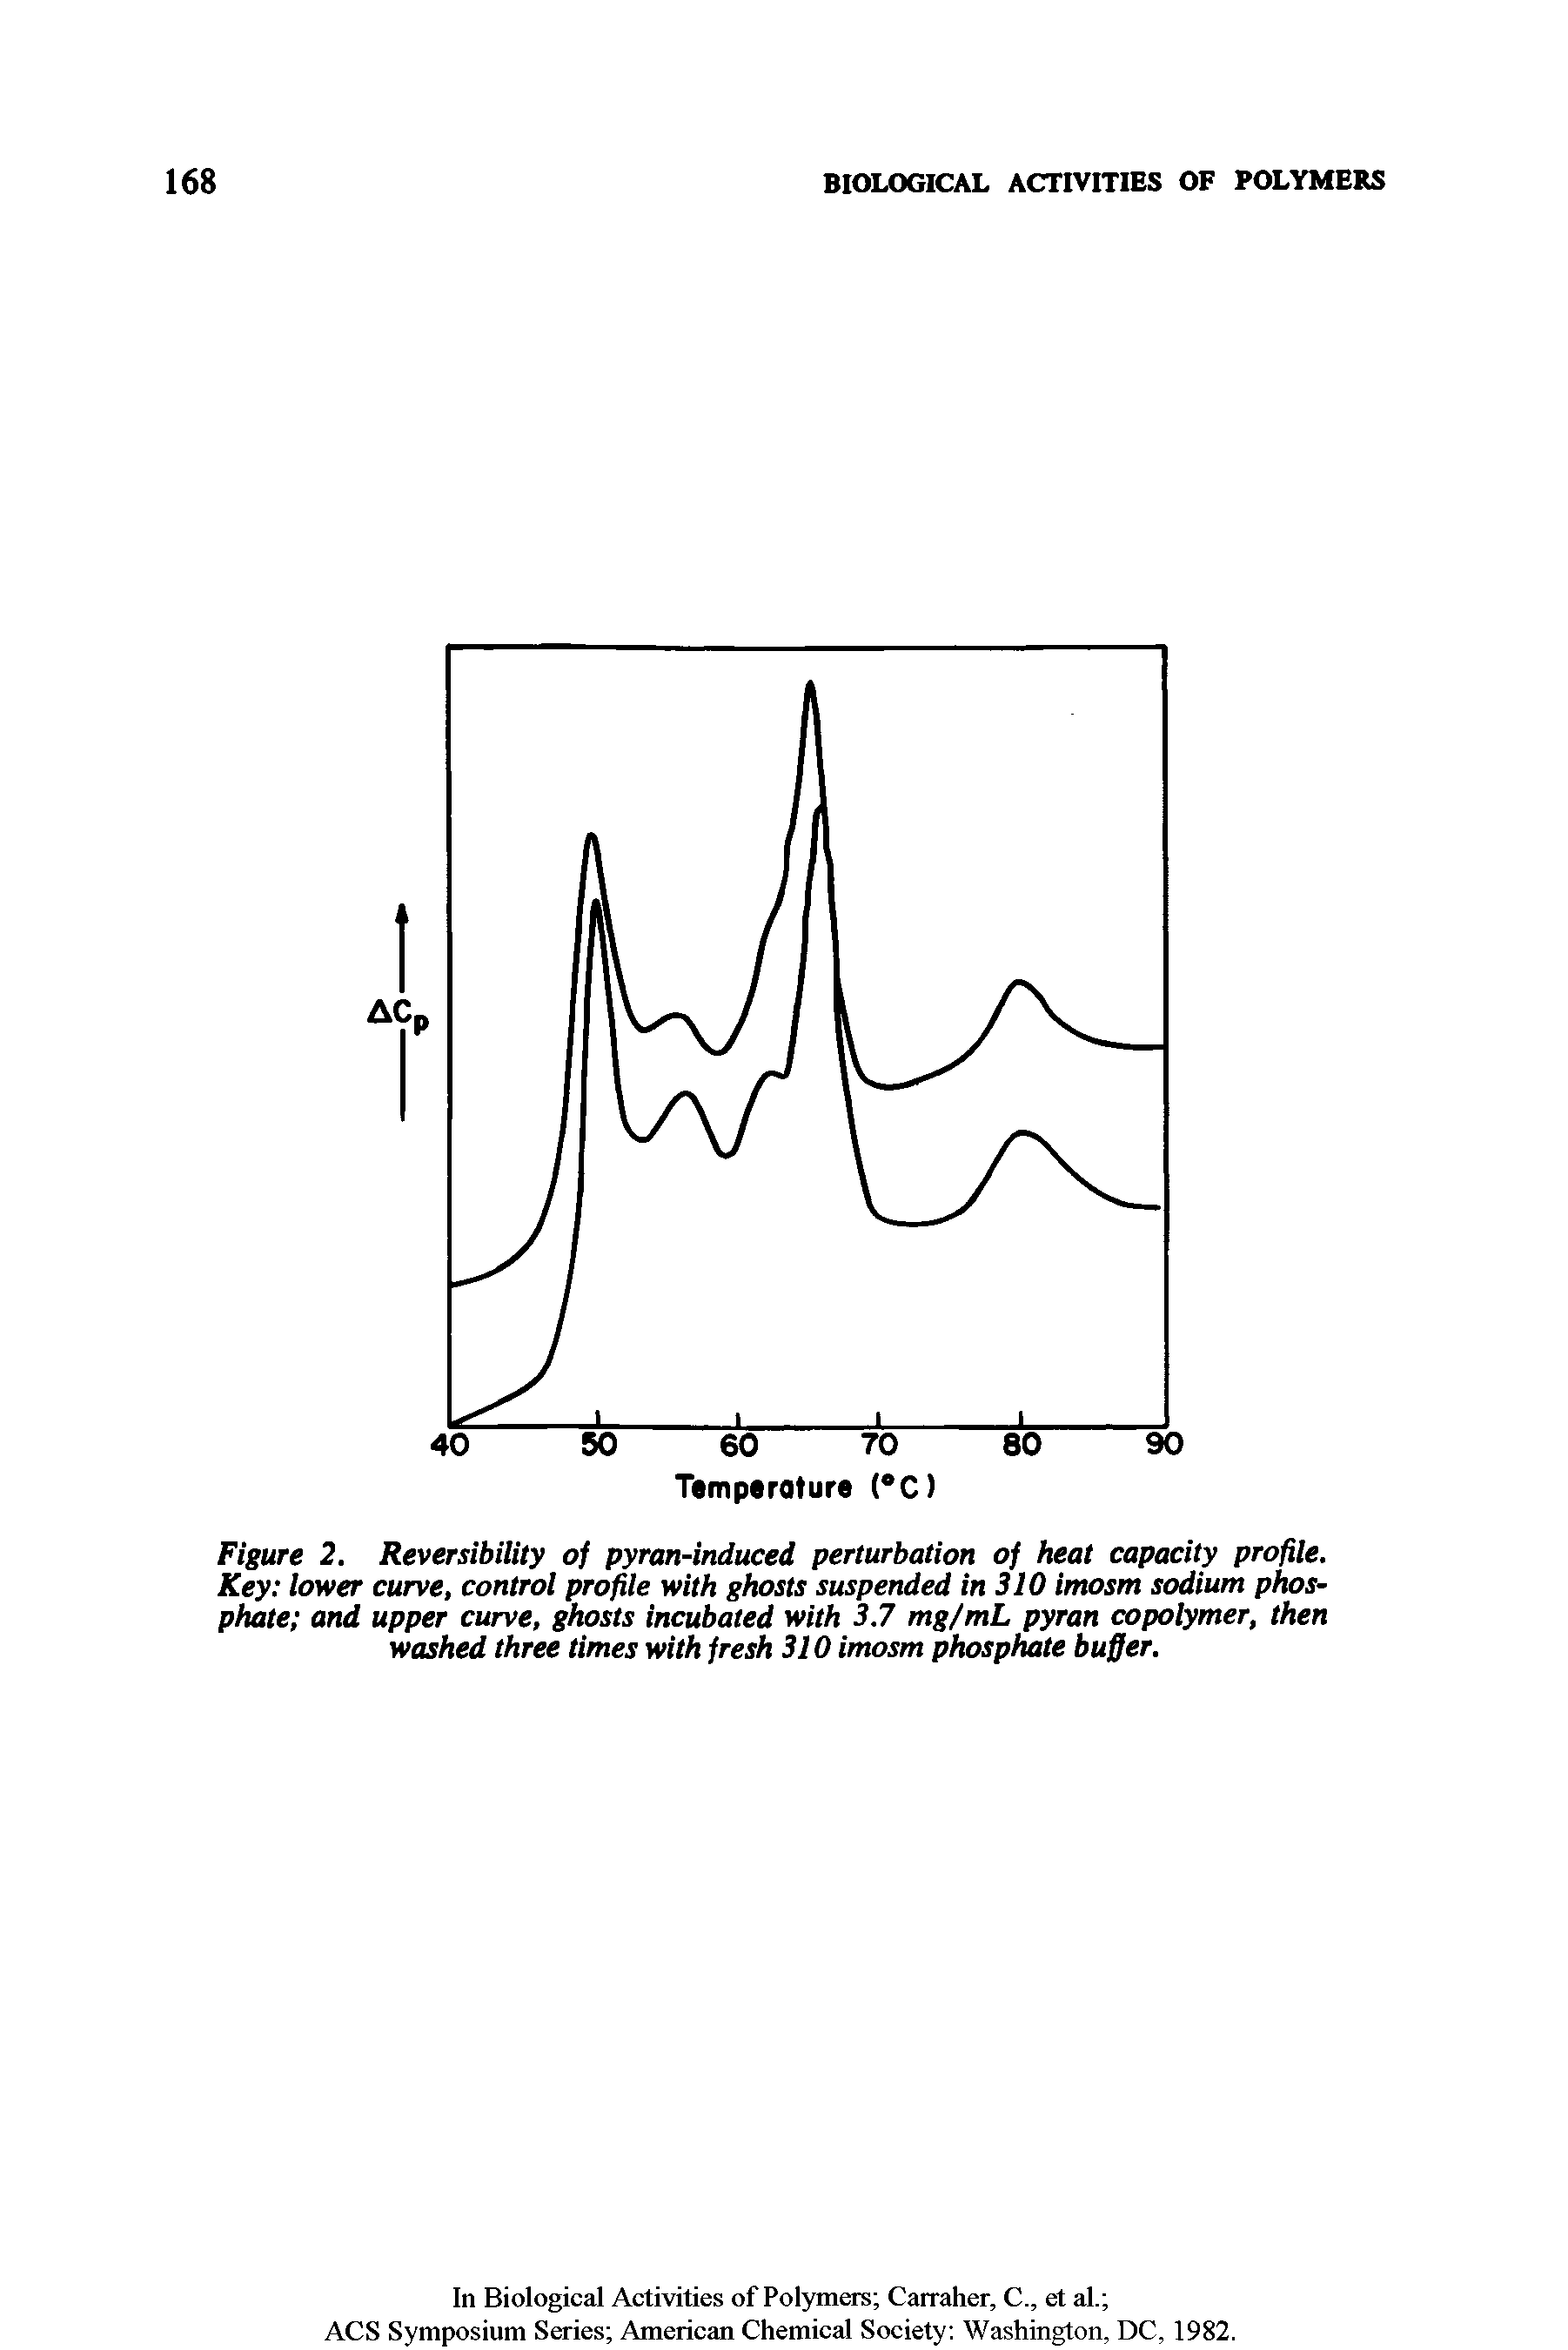 Figure 2. Reversibility of pyran-induced perturbation of heat capacity profile. Key lower curve, control profile with ghosts suspended in 310 imosm sodium phosphate and upper curve, ghosts incubated with 3.7 mg/mL pyran copolymer, then washed three times with fresh 310 imosm phosphate buffer.